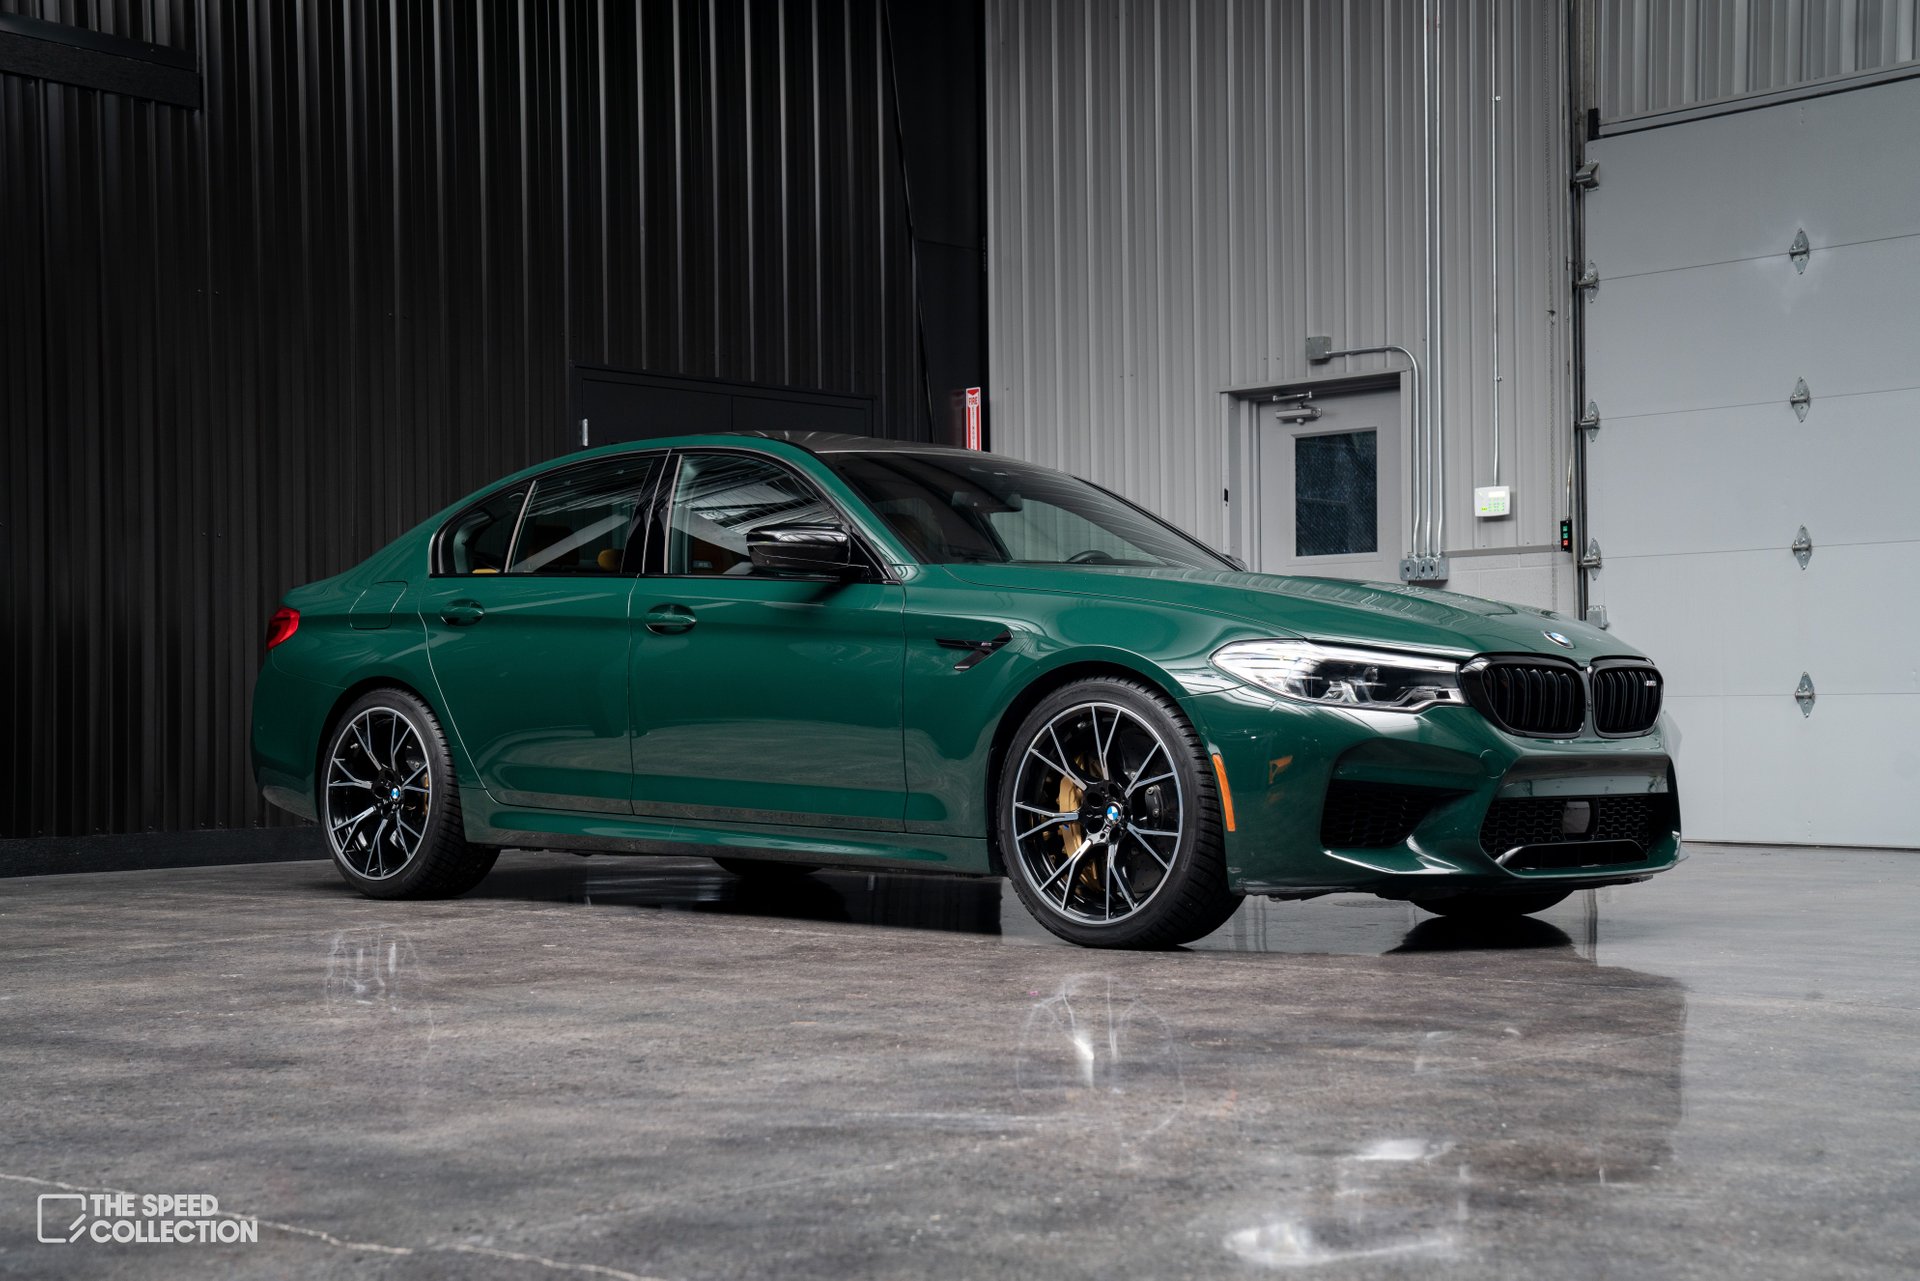 2020 BMW M5 | The Speed Collection